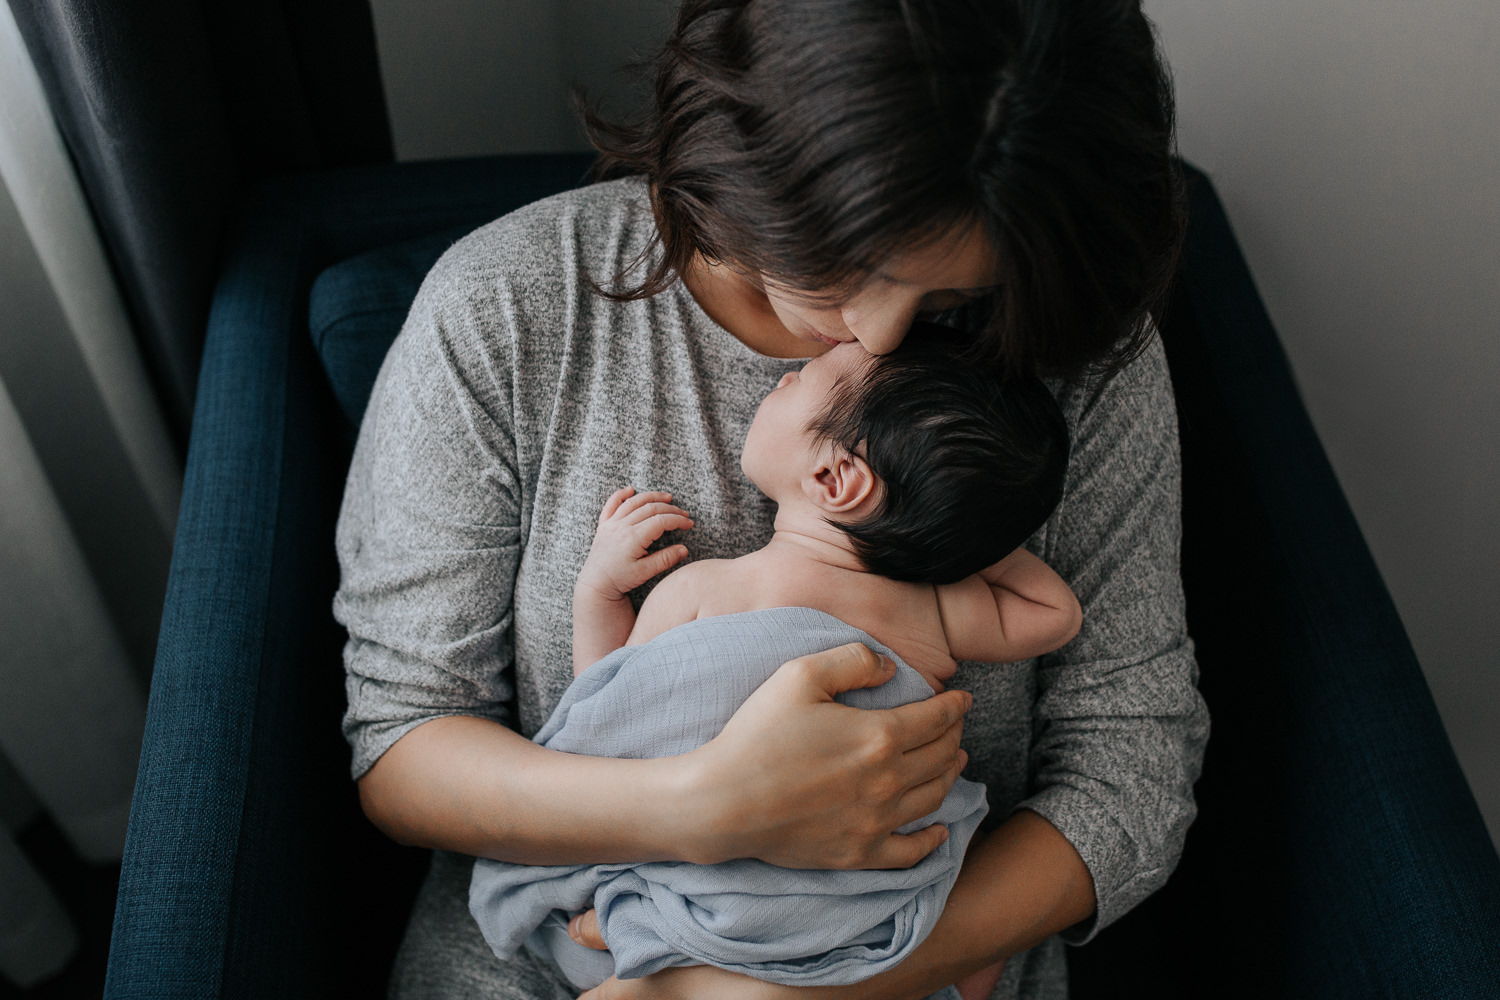 mother with long dark hair sitting in blue armchair snuggling 2 week old sleeping baby boy to her chest, son wrapped in swaddle - York Region In-Home Photos